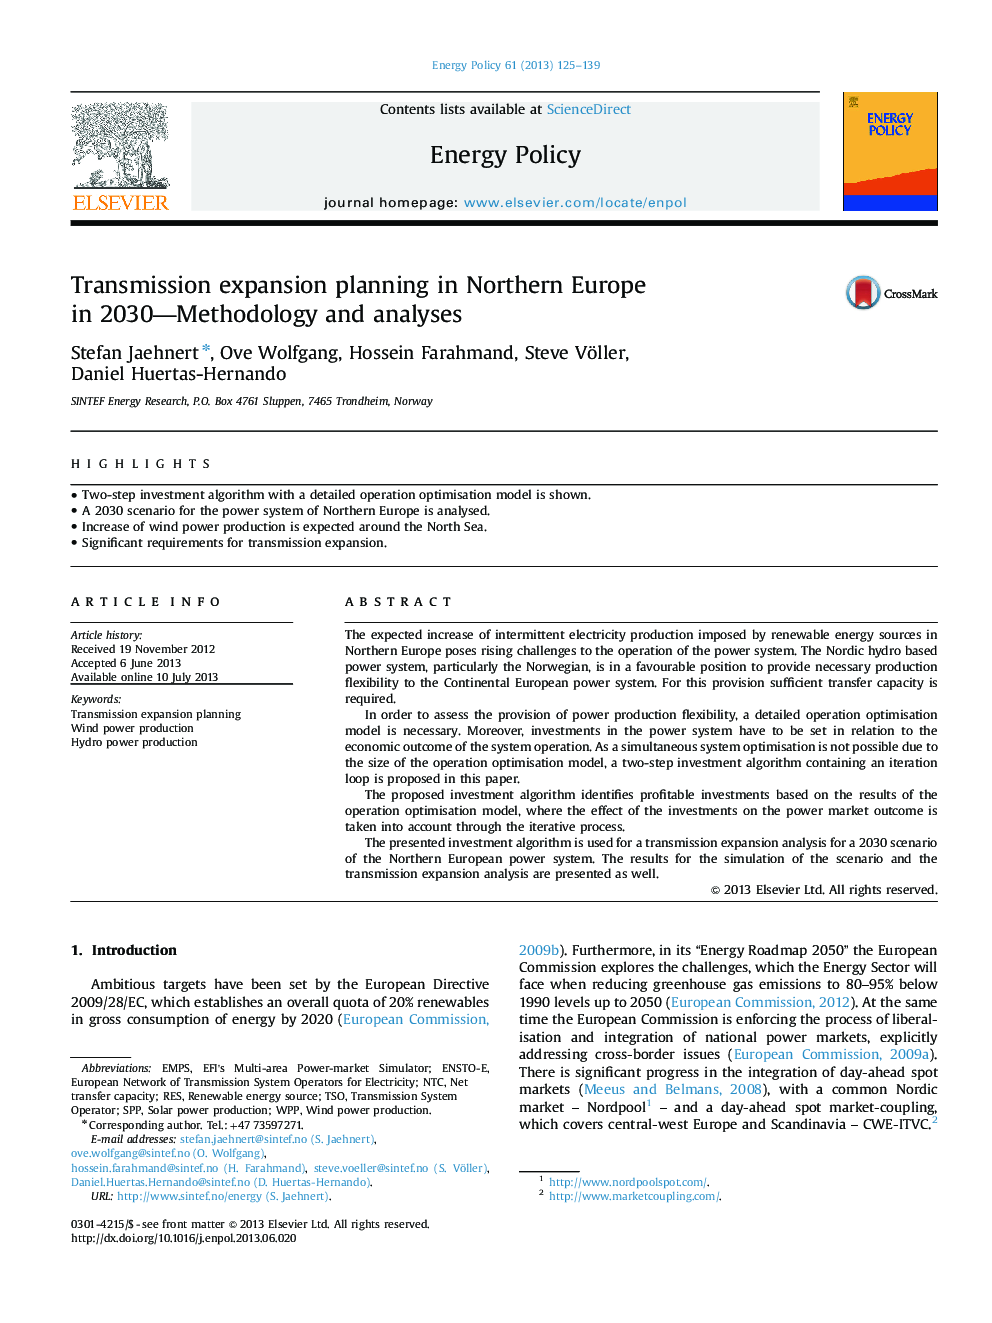 Transmission expansion planning in Northern Europe in 2030-Methodology and analyses